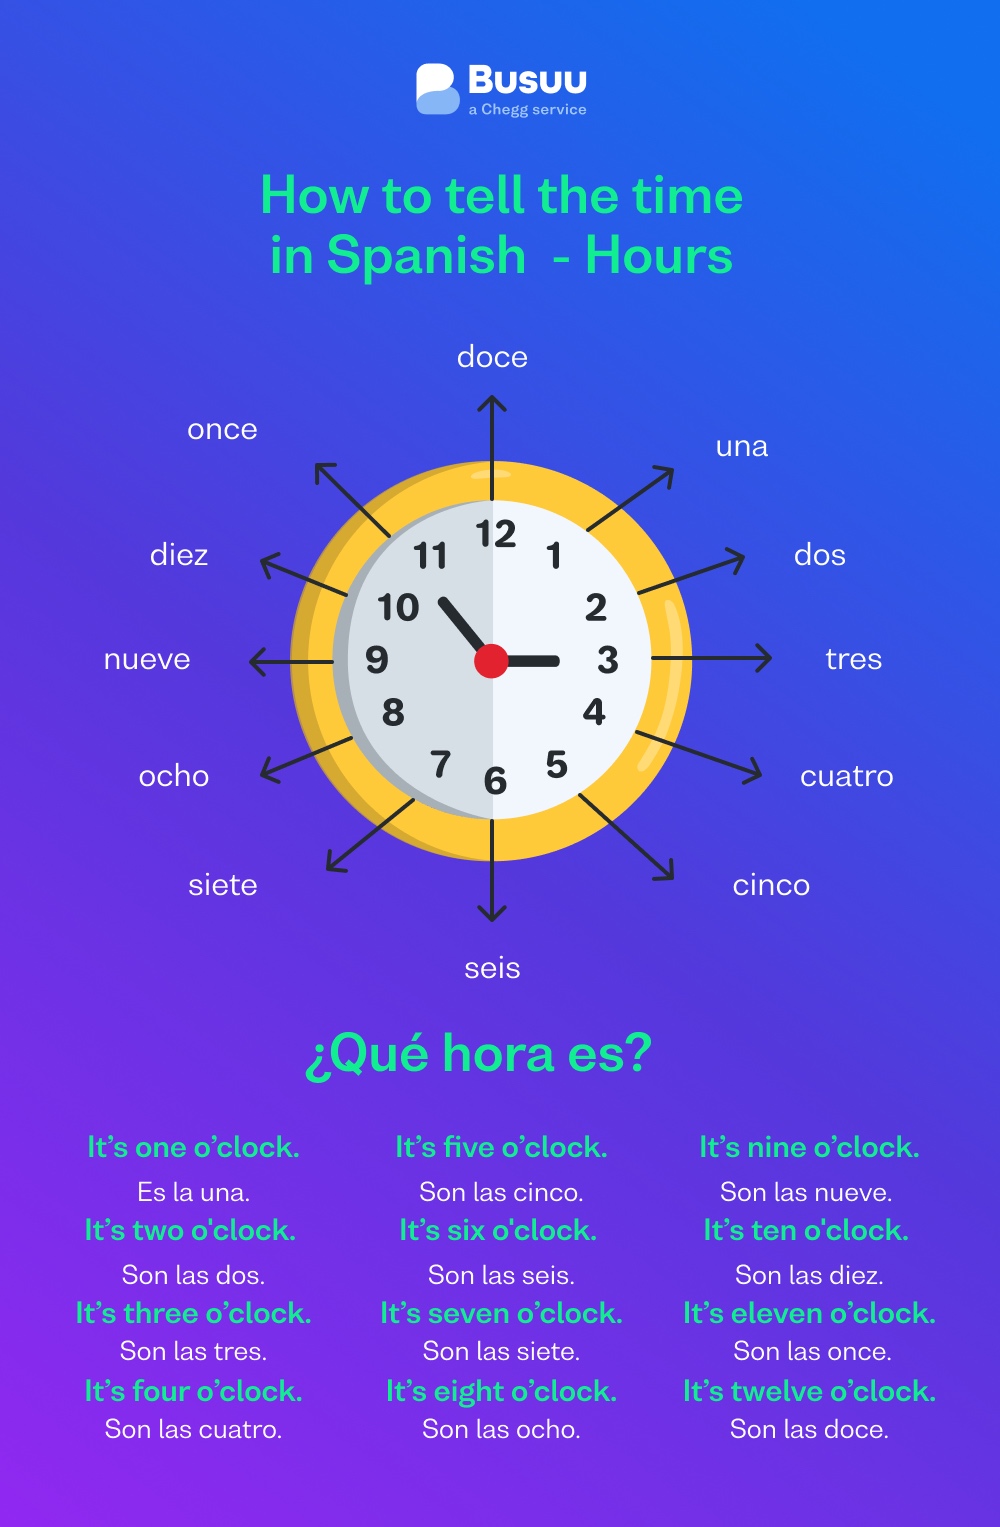 Time in Spanish - Hours